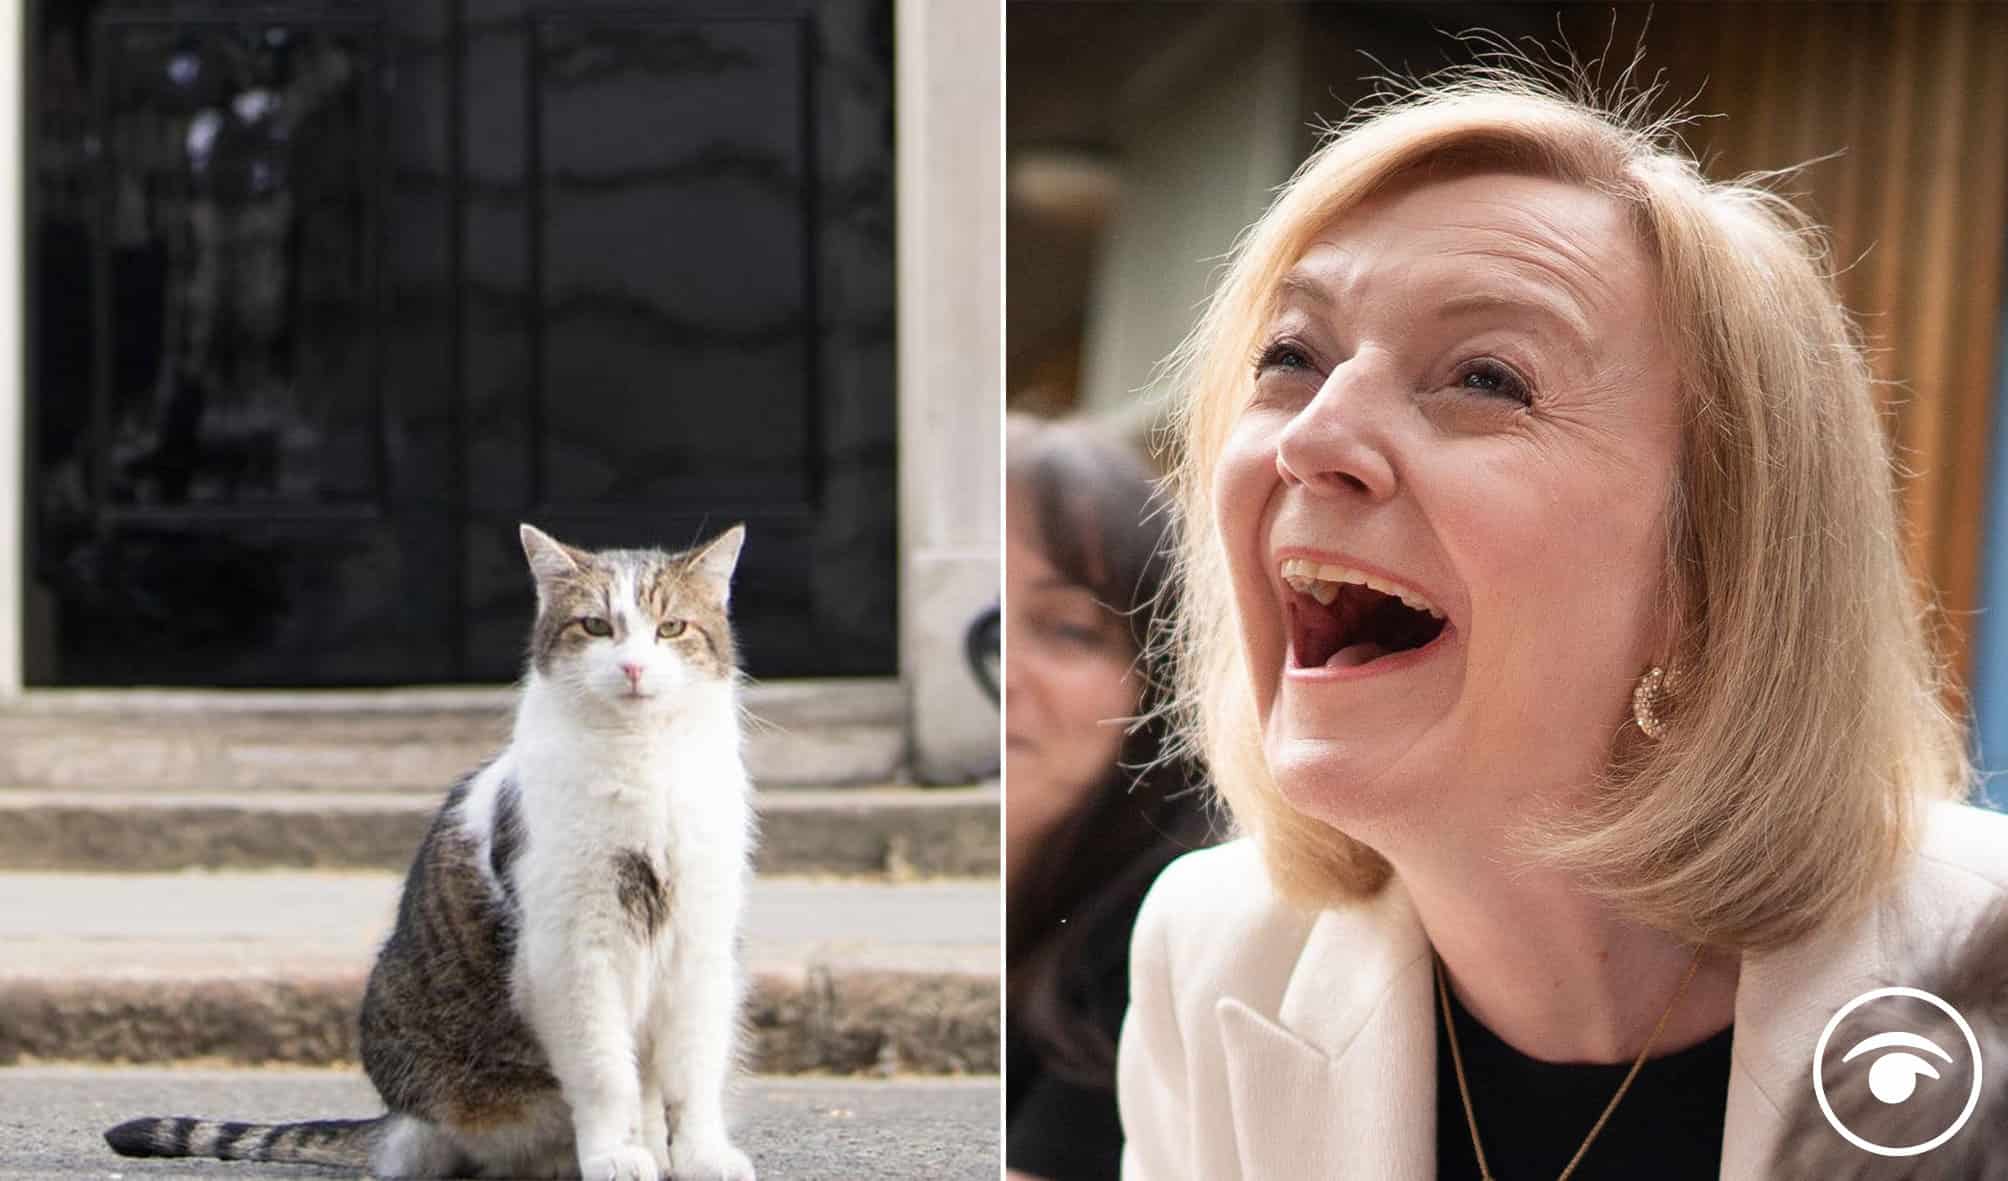 Watch: Children tell Truss ‘Larry the cat should be PM’ after being ambushed by badgers